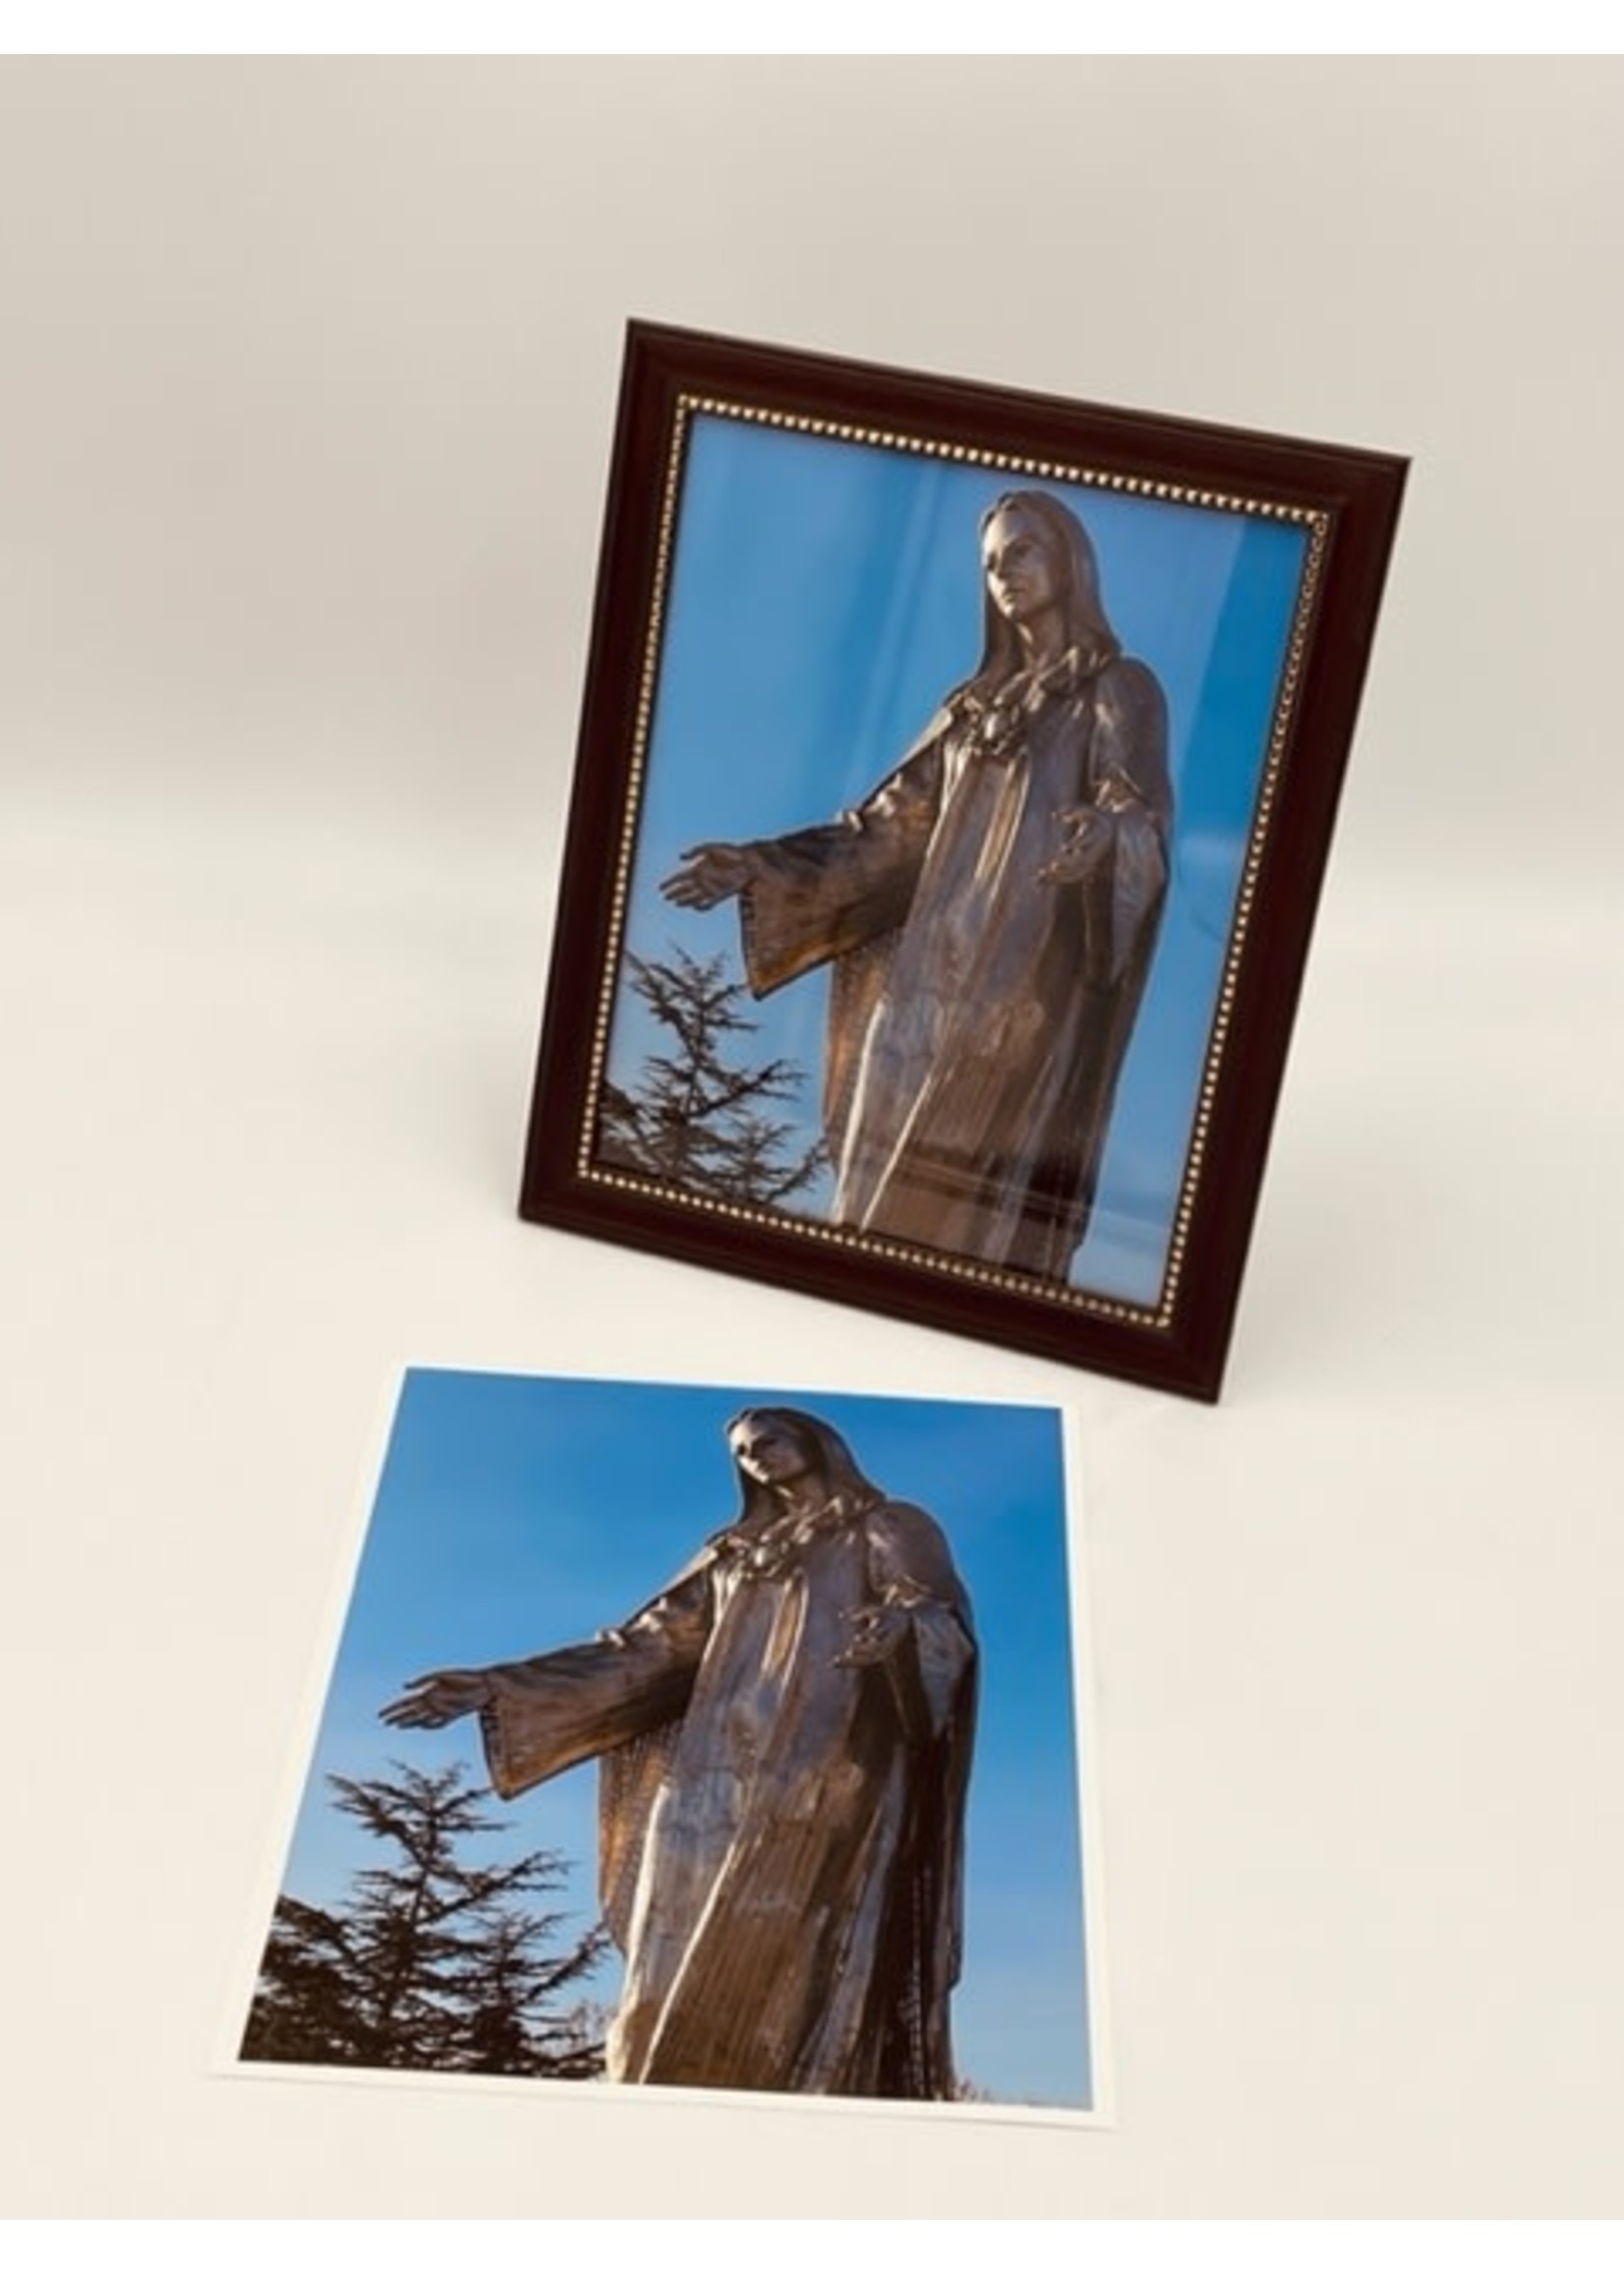 Our Lady of Peace Photo Print - 8" x 10.75"